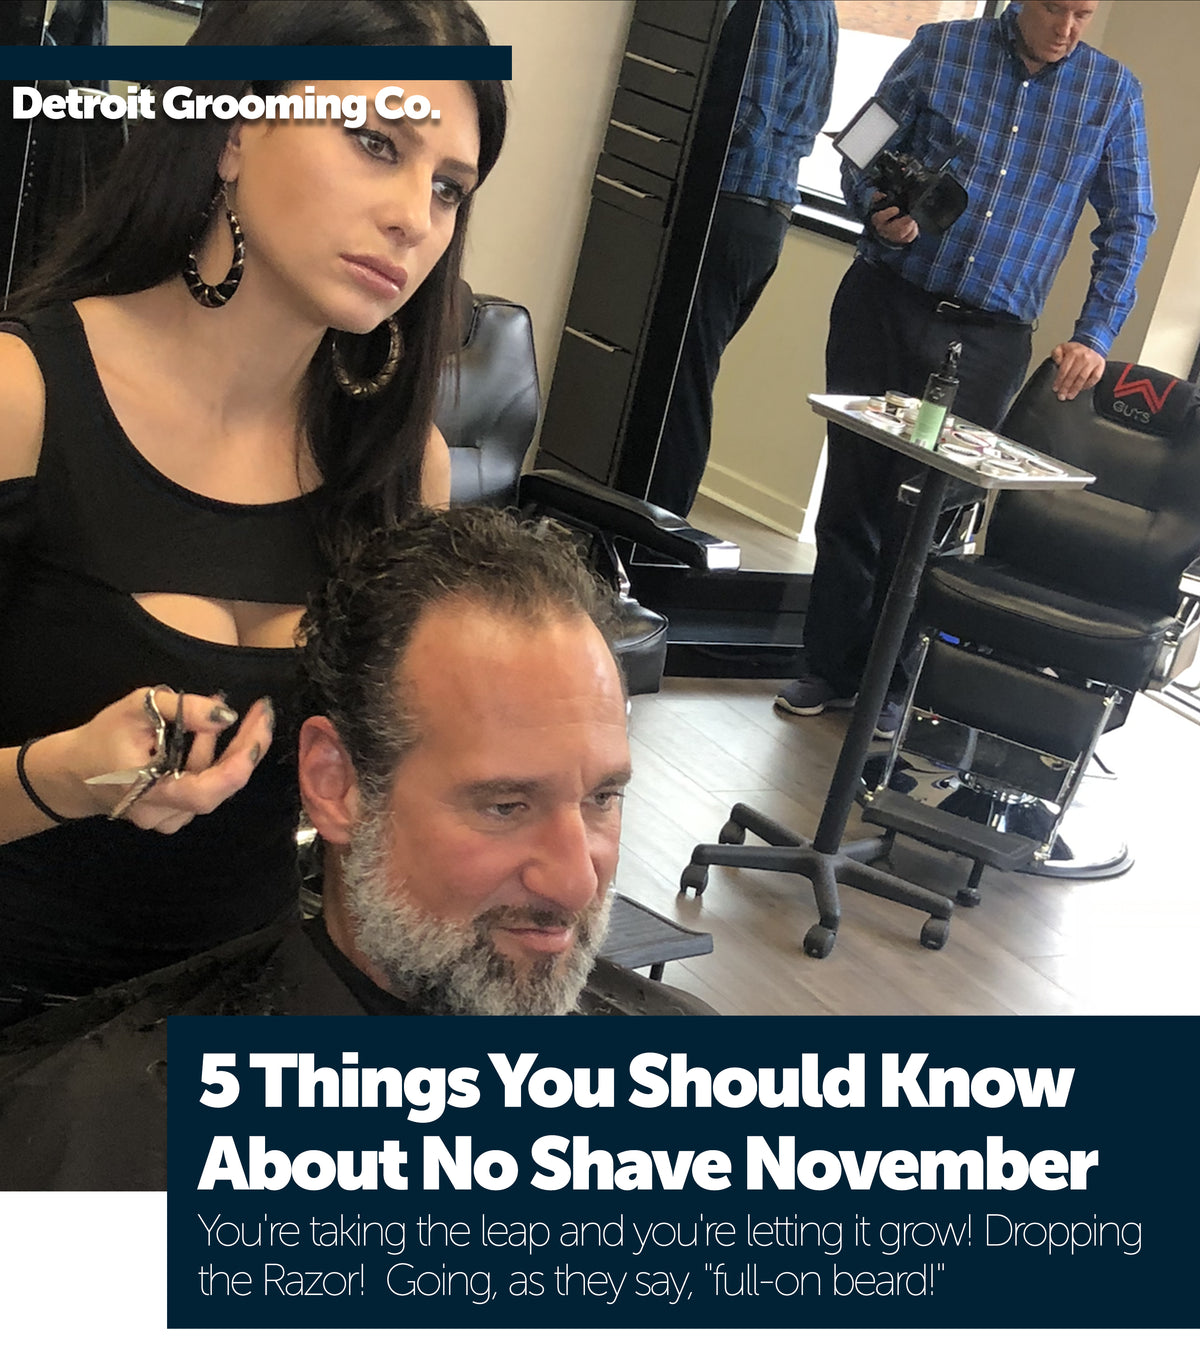 5 Things You Should Know About No-Shave November